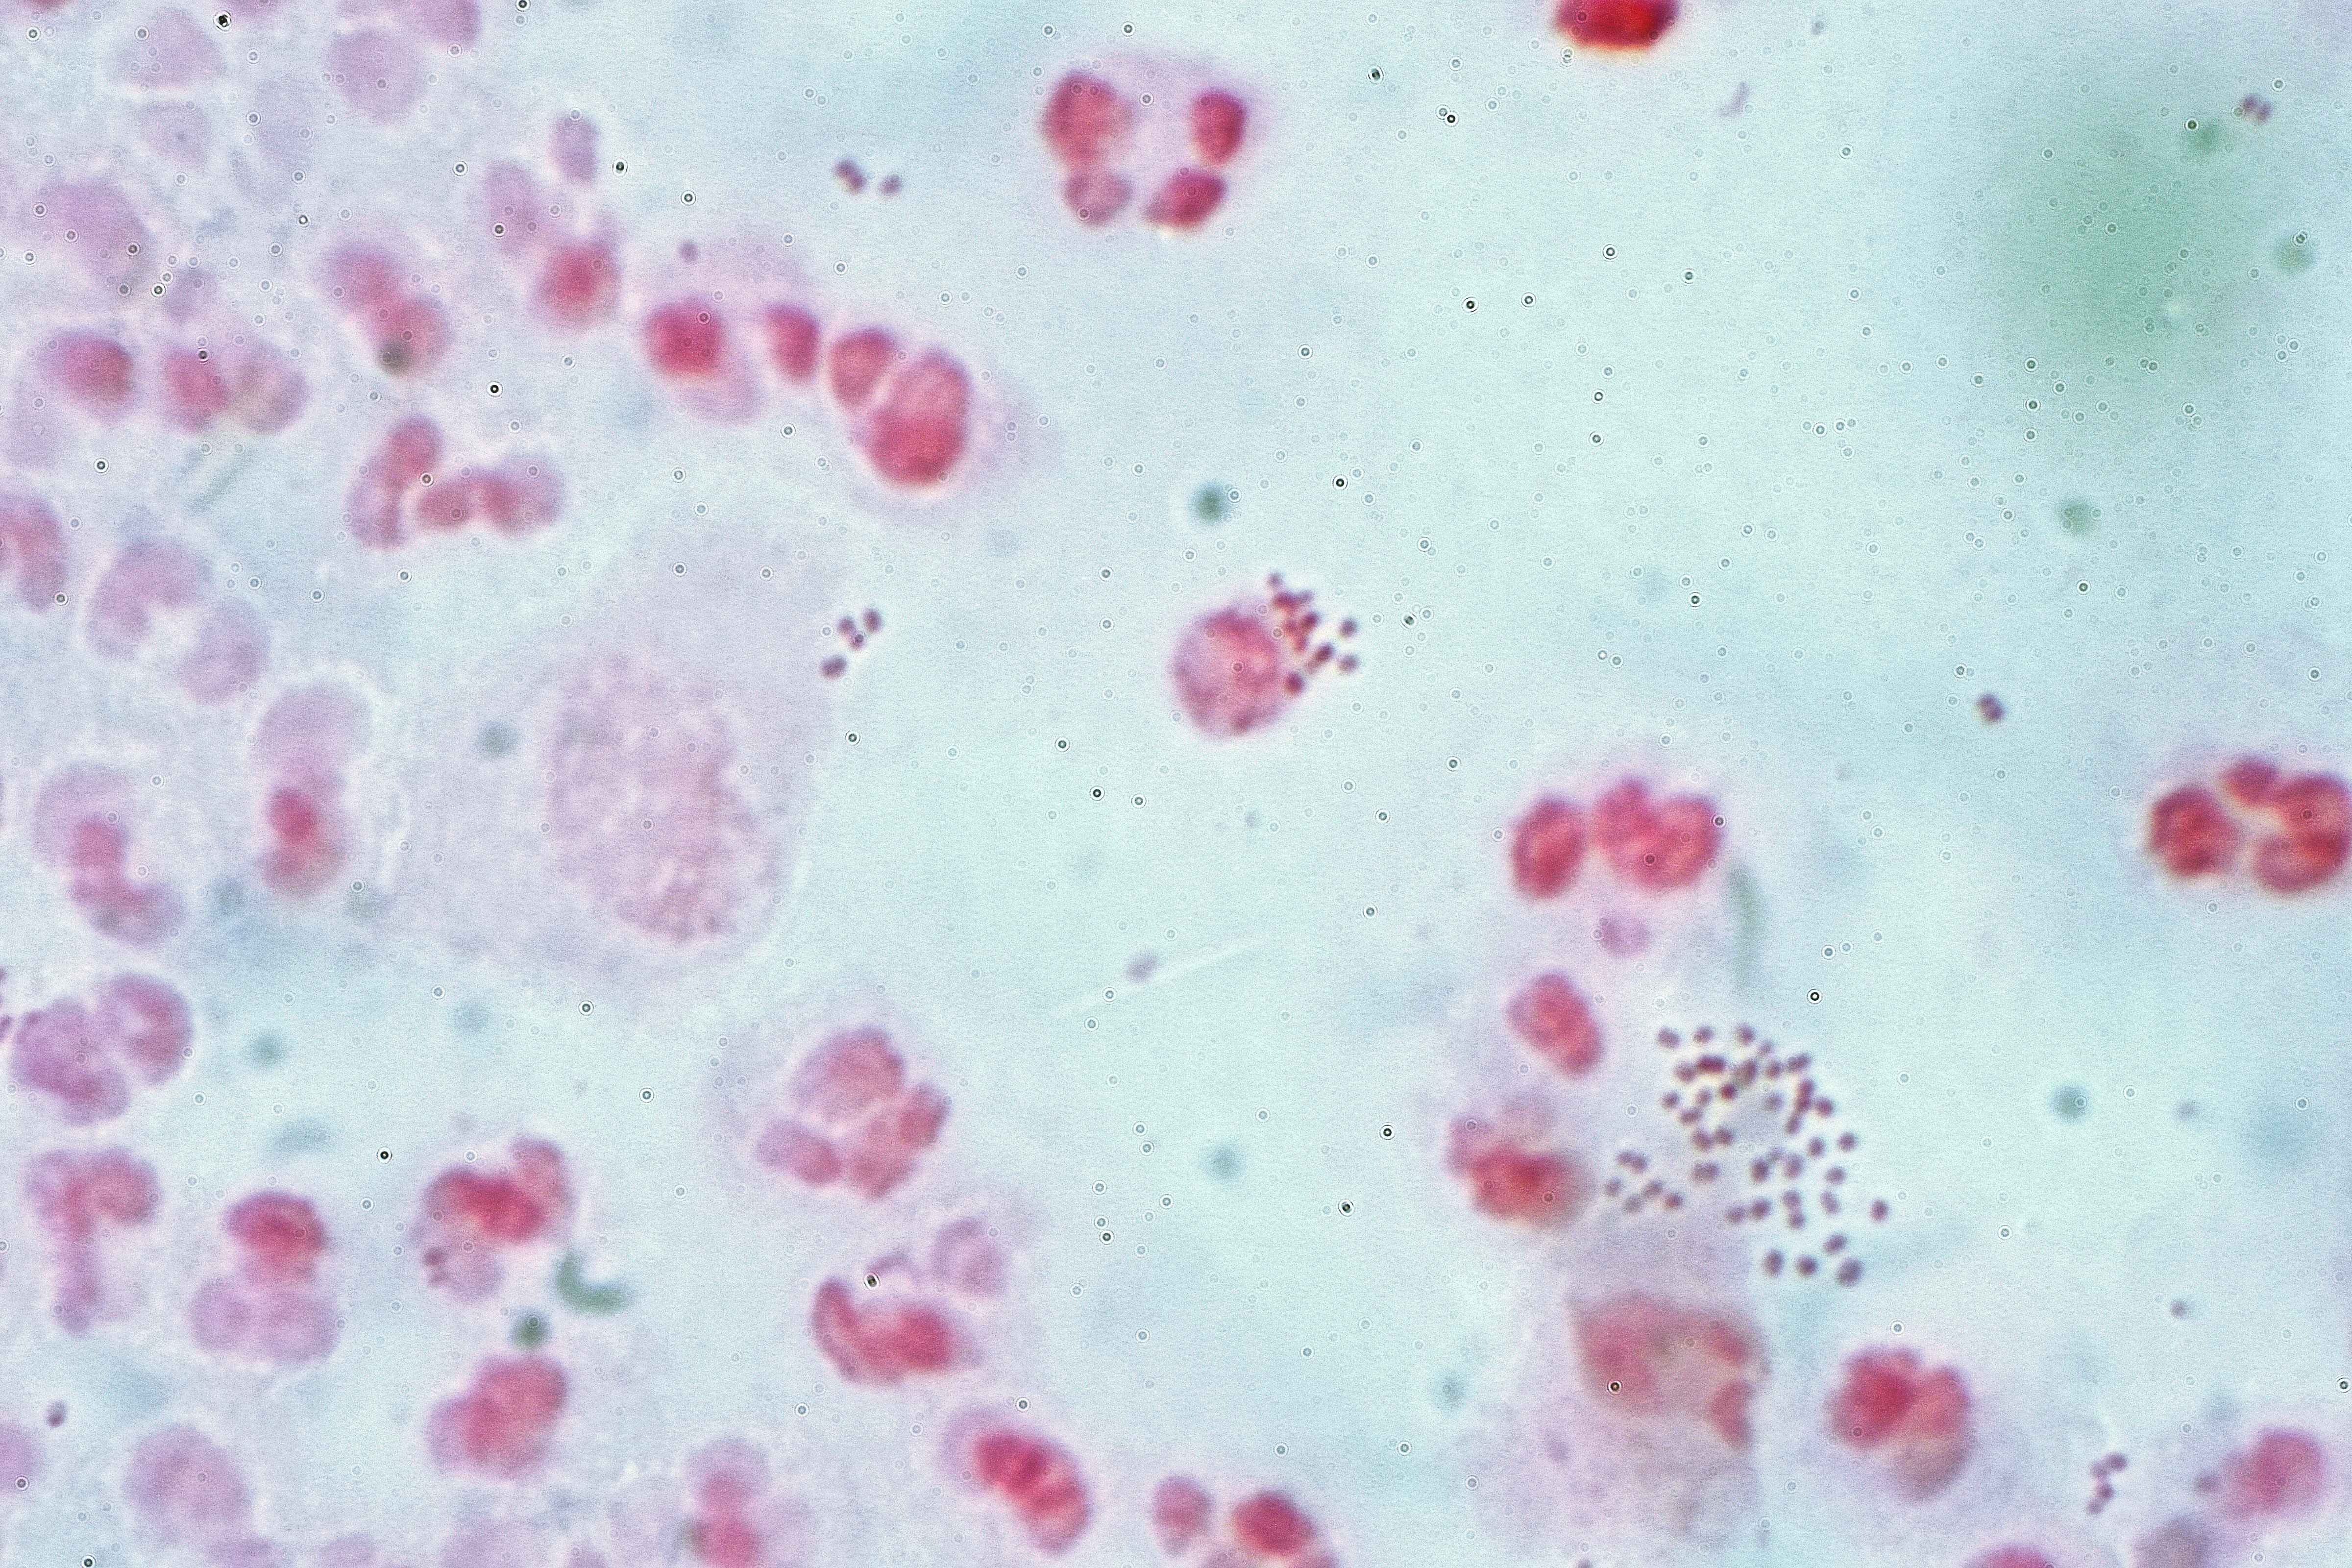 Neisseria gonorrhoea in pus from a man with a purulent urethral discharge - Gram stain.